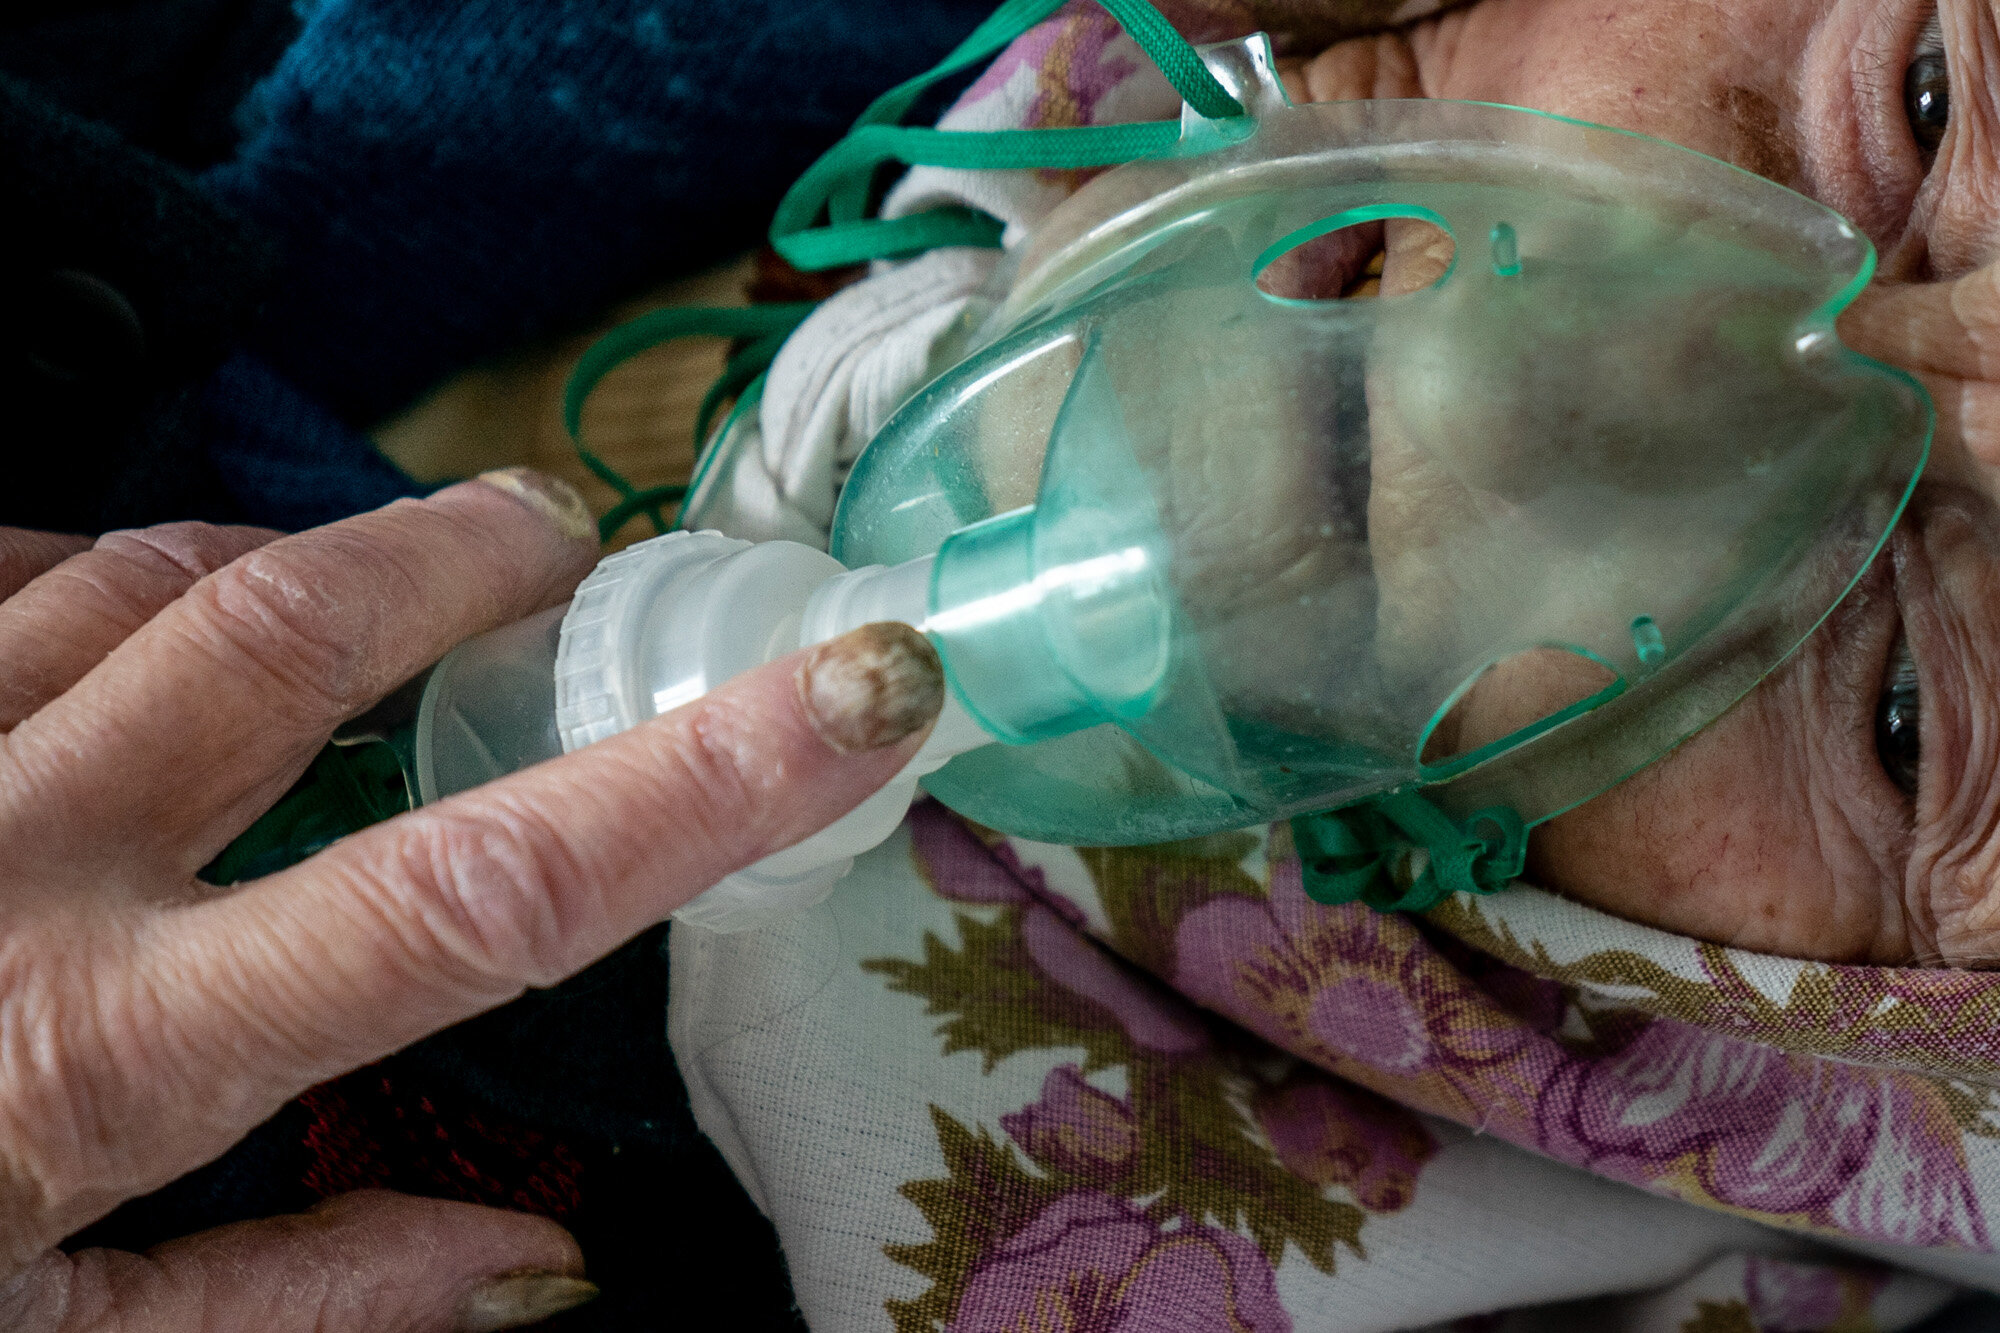  An elderly woman suffering from COVID-19 breathes with the help of an oxygen mask in a hospital in Pochaiv, Ukraine, on May 1, 2020. (AP Photo/Evgeniy Maloletka) 